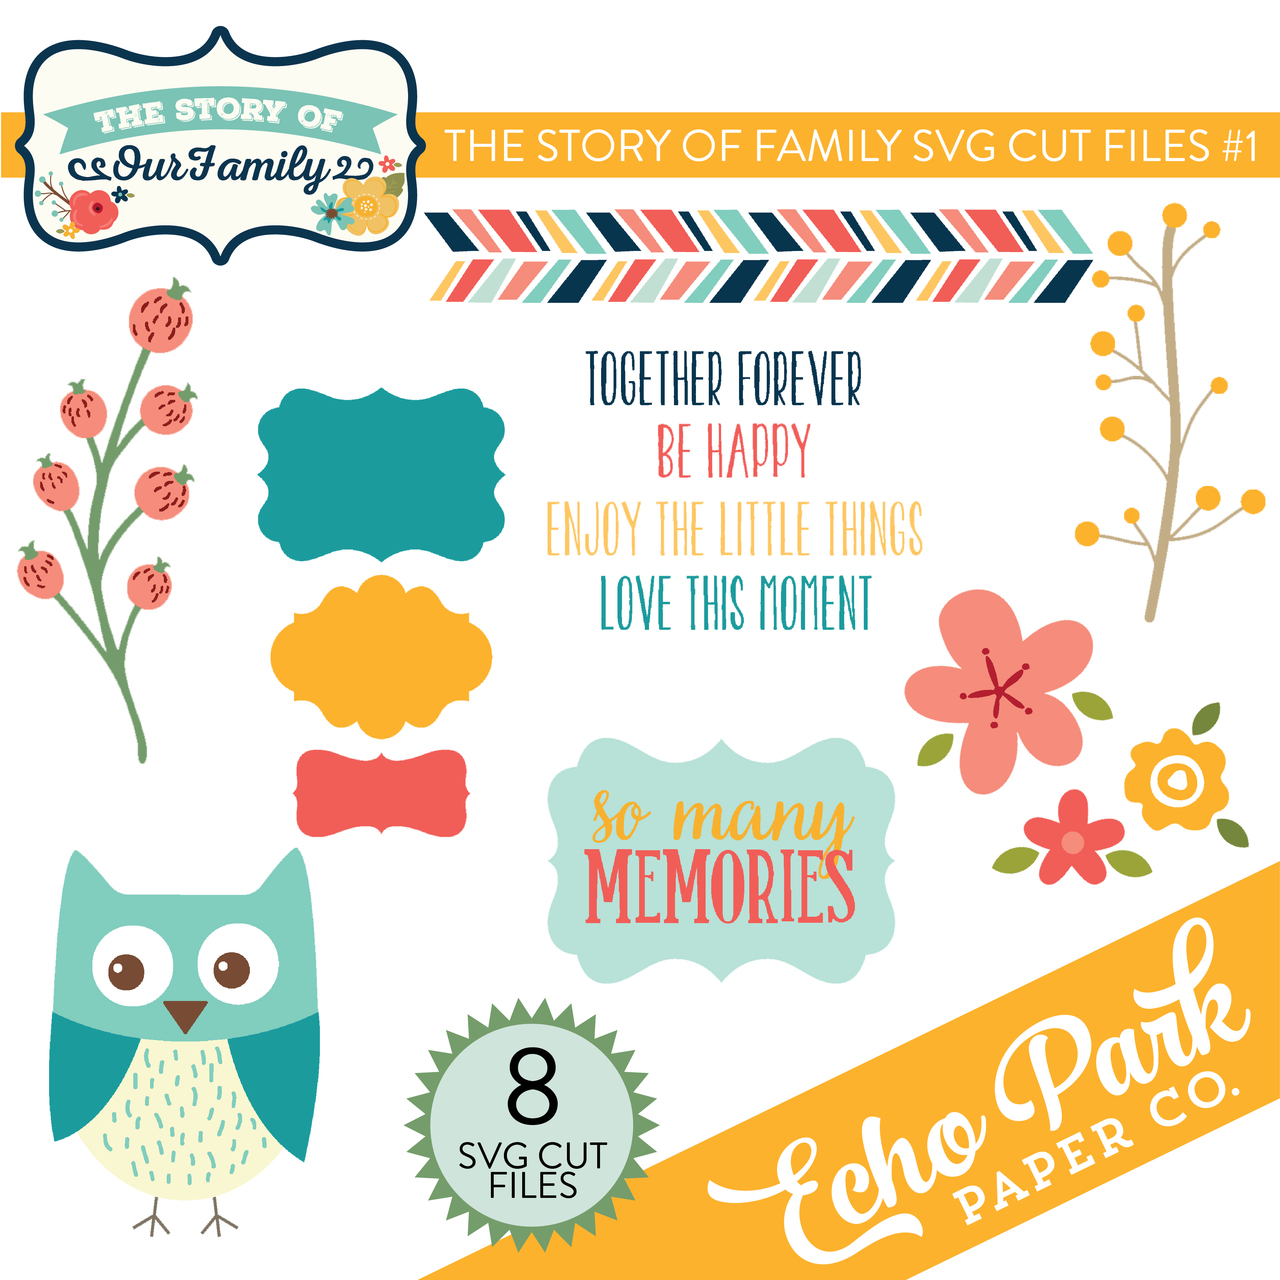 The Story of Family SVG Cut Files #1